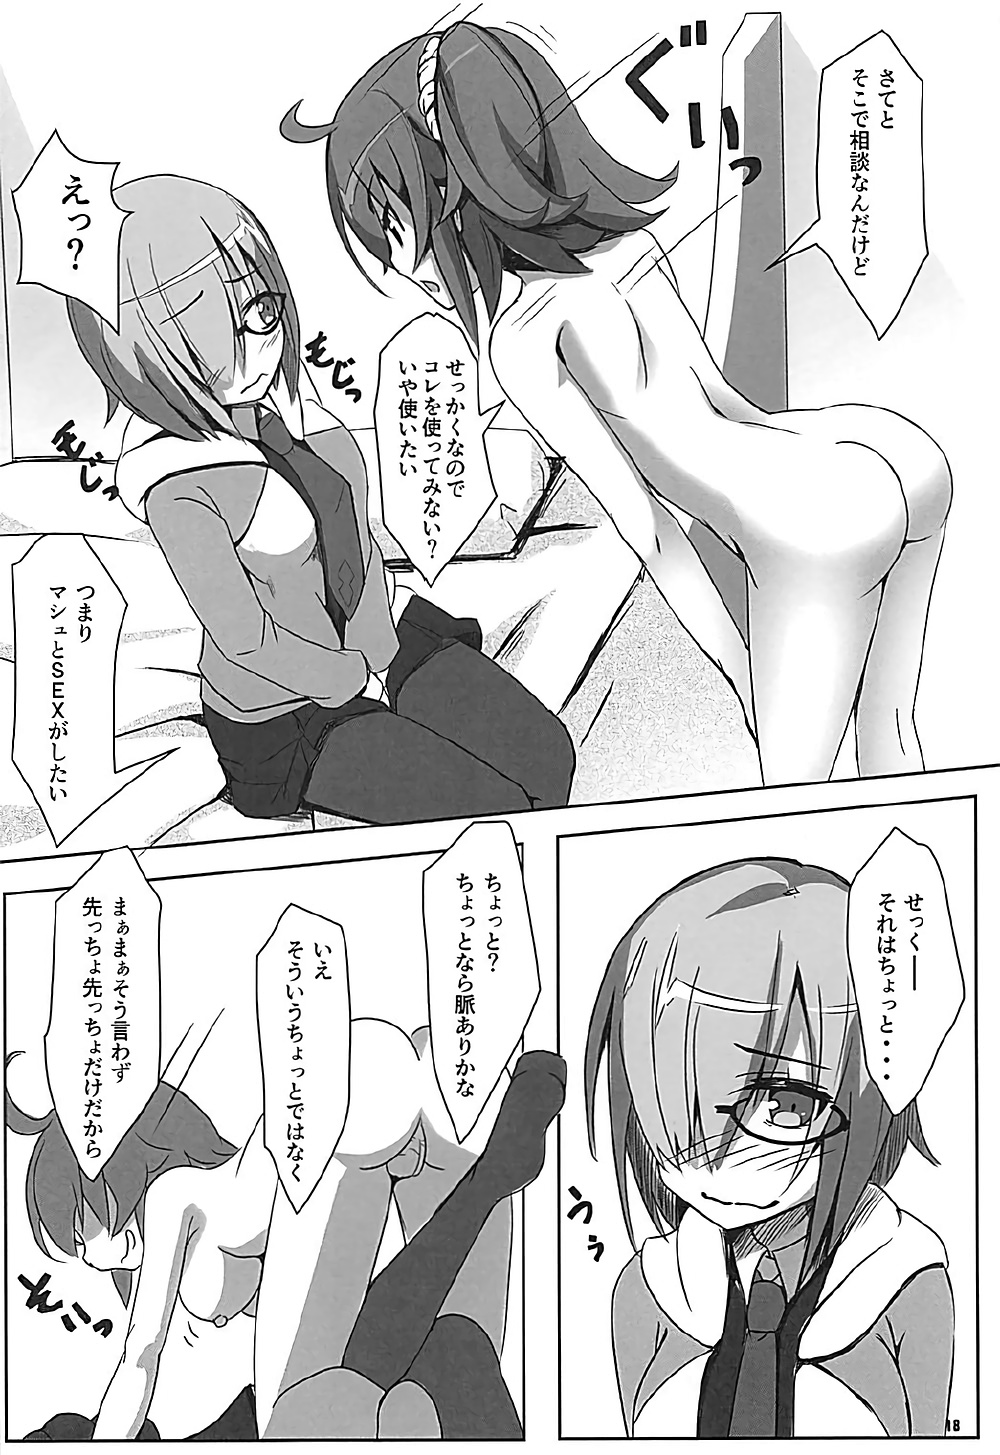 (C92) [Wappoi (Wapokichi)] Chaban Kyougen Mash to Don (Fate/Grand Order) page 19 full